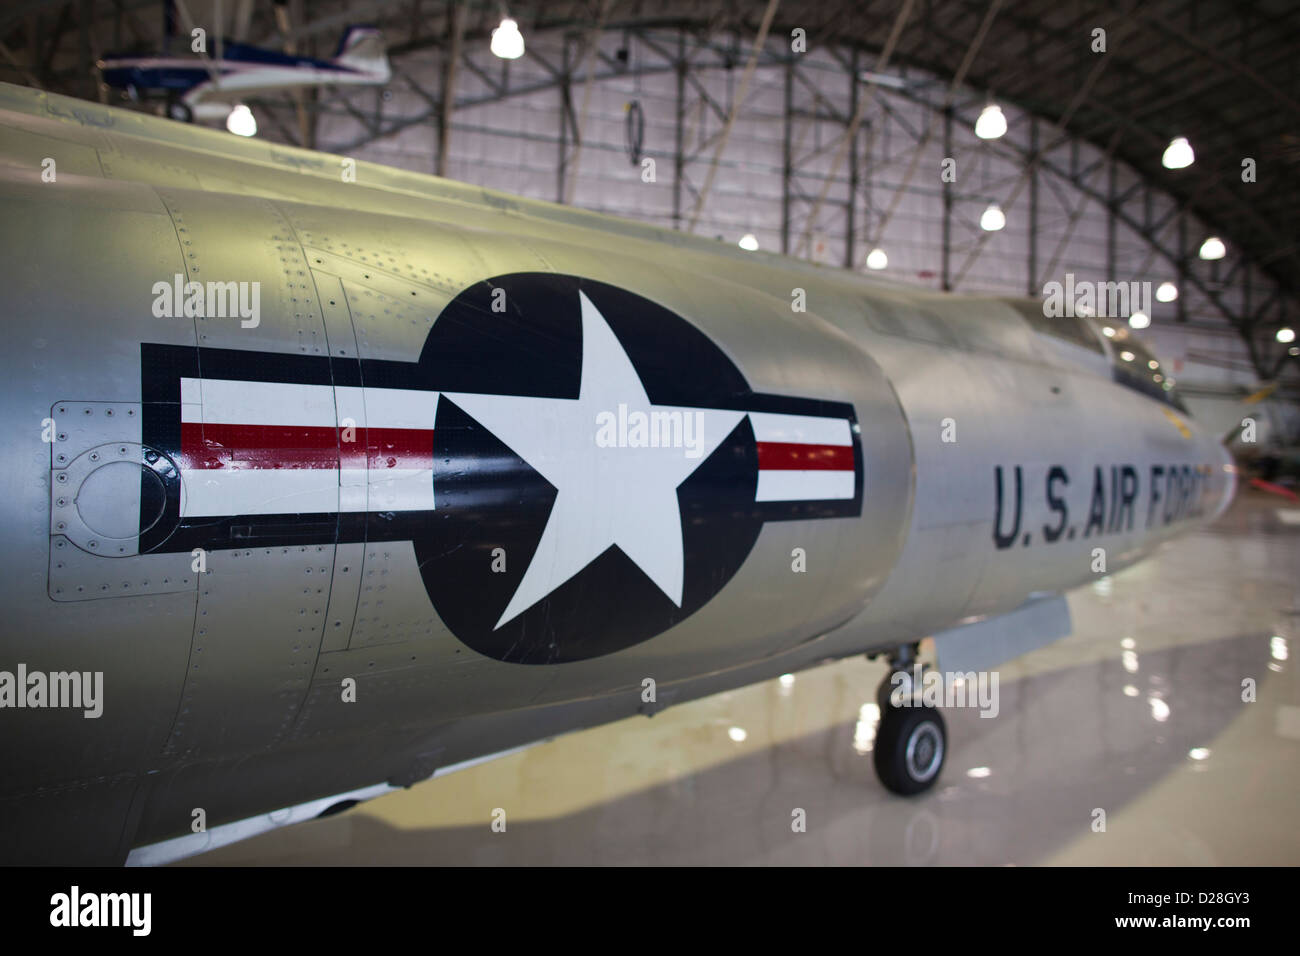 USA, Colorado, Denver, Wings over the Rockies, Air and Space Museum, F-104 Starfighter, detail Stock Photo